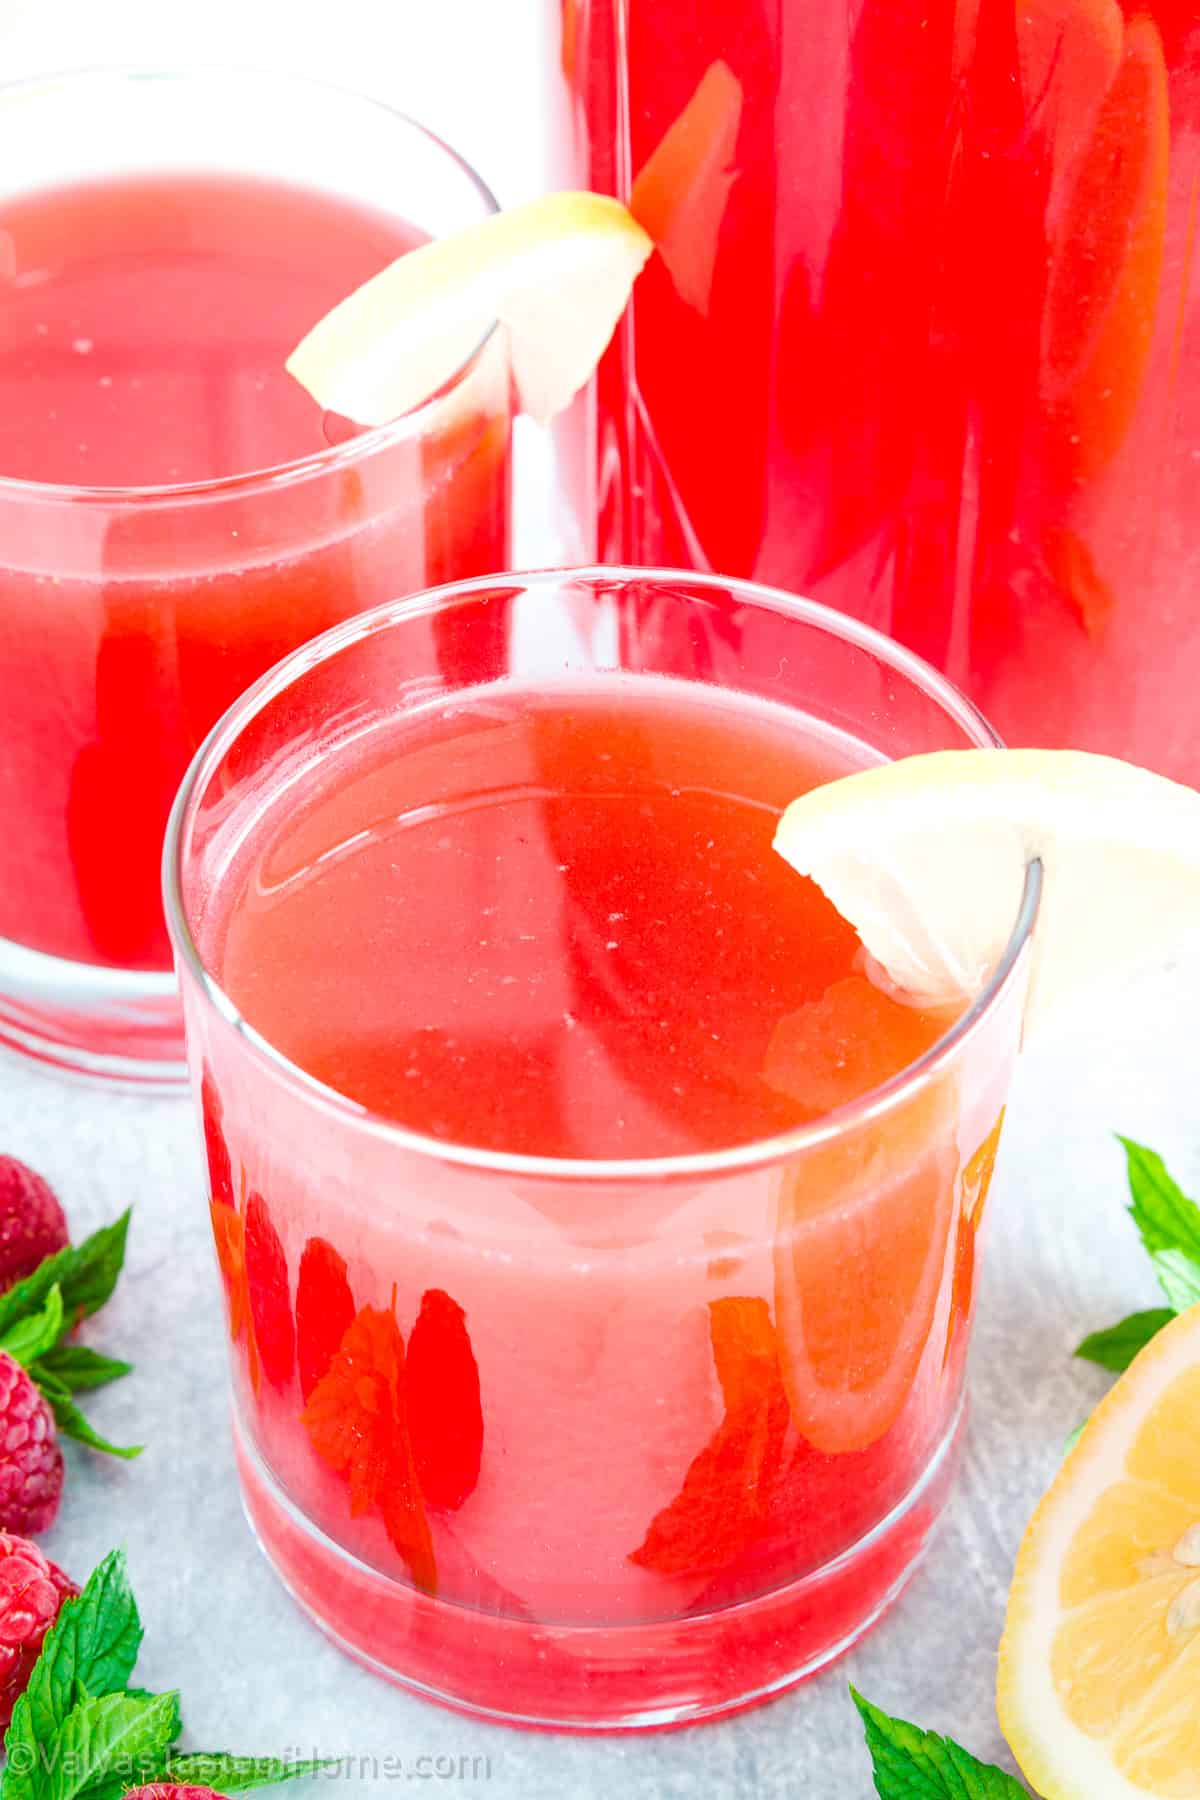 Raspberry lemonade is a tasty drink that mixes the sharpness of lemons with the natural sweetness of raspberries.